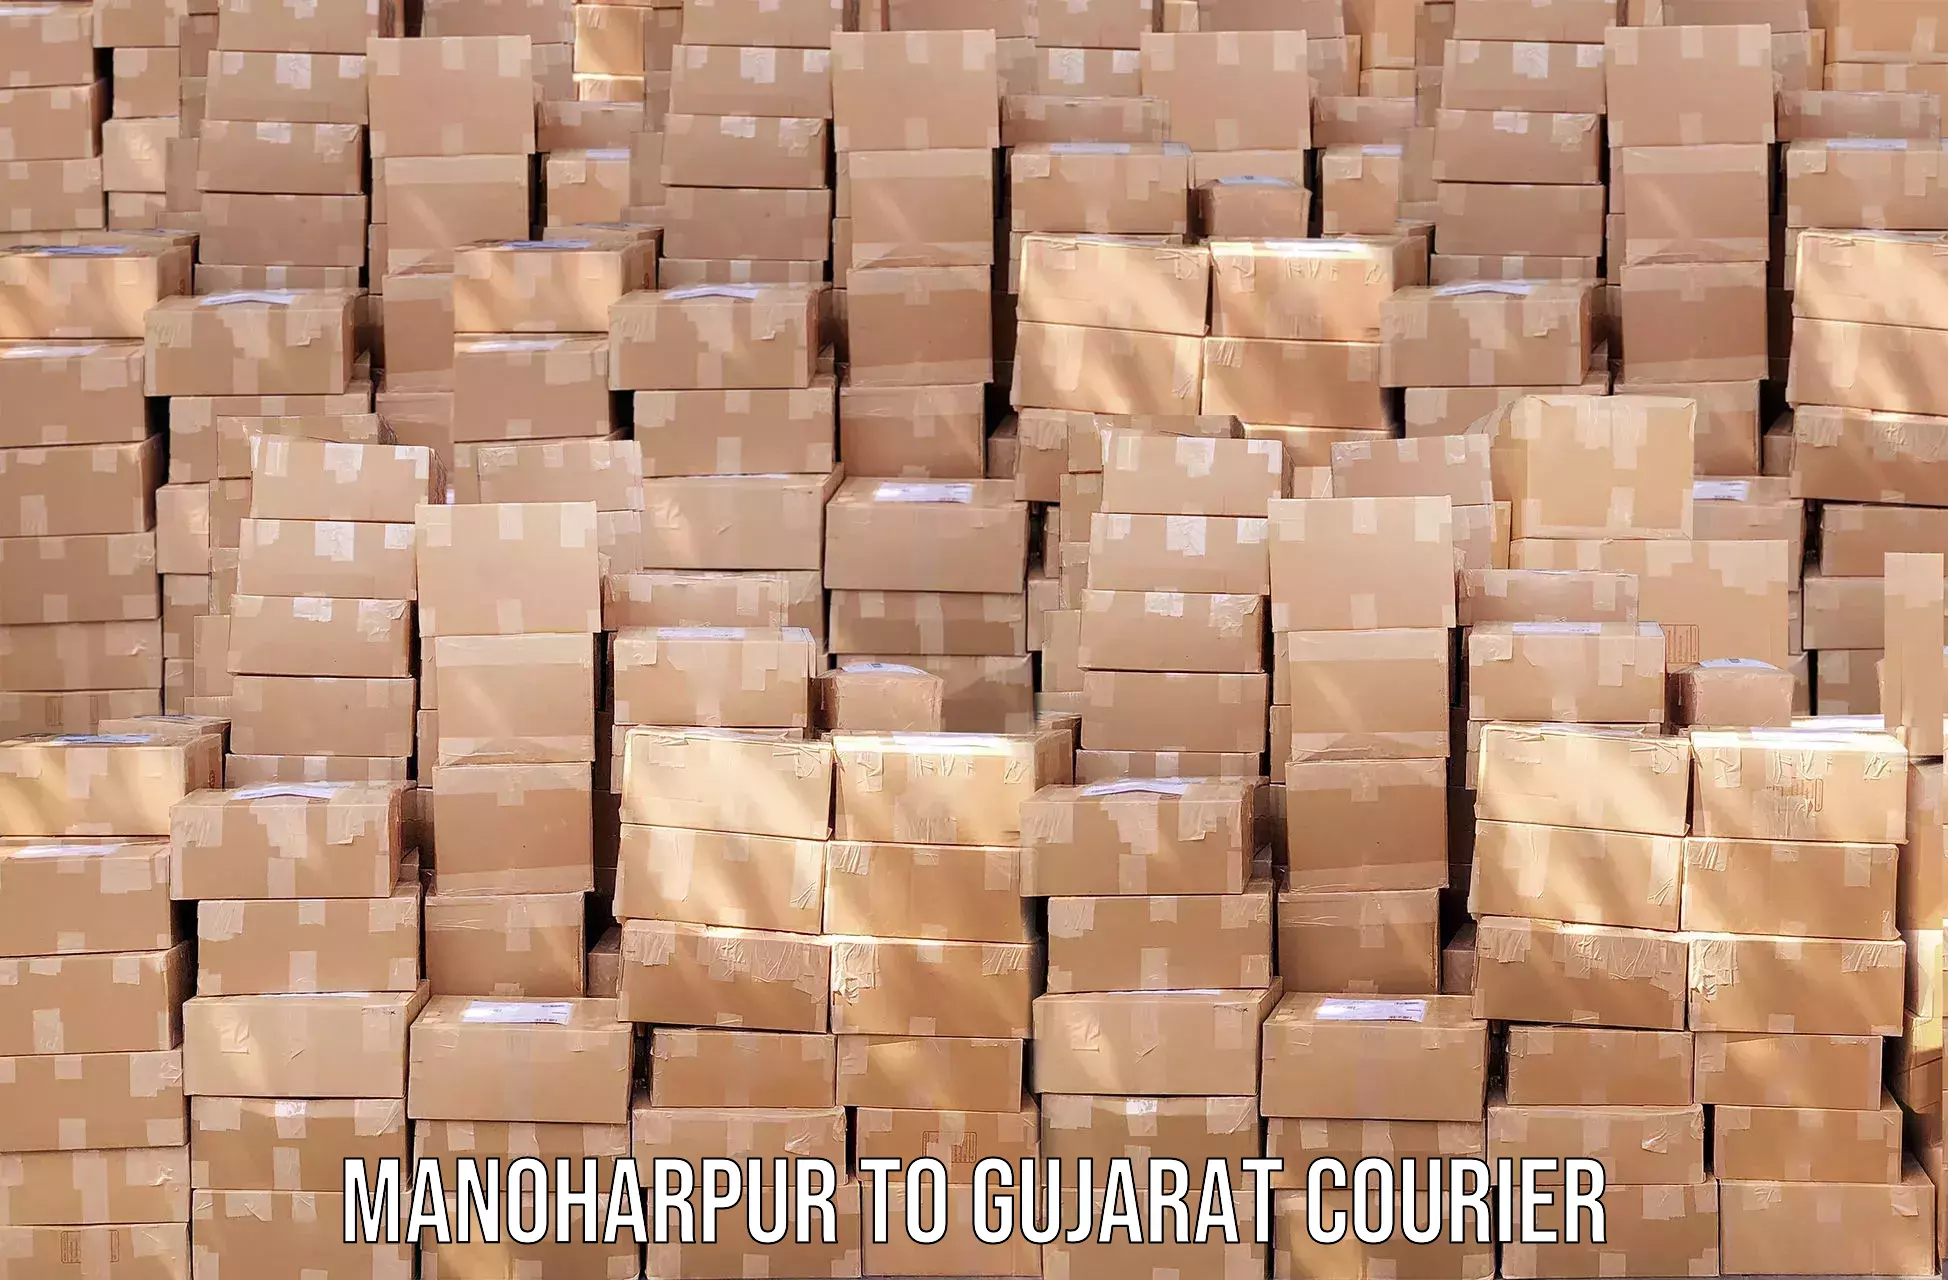 Global courier networks Manoharpur to Anand